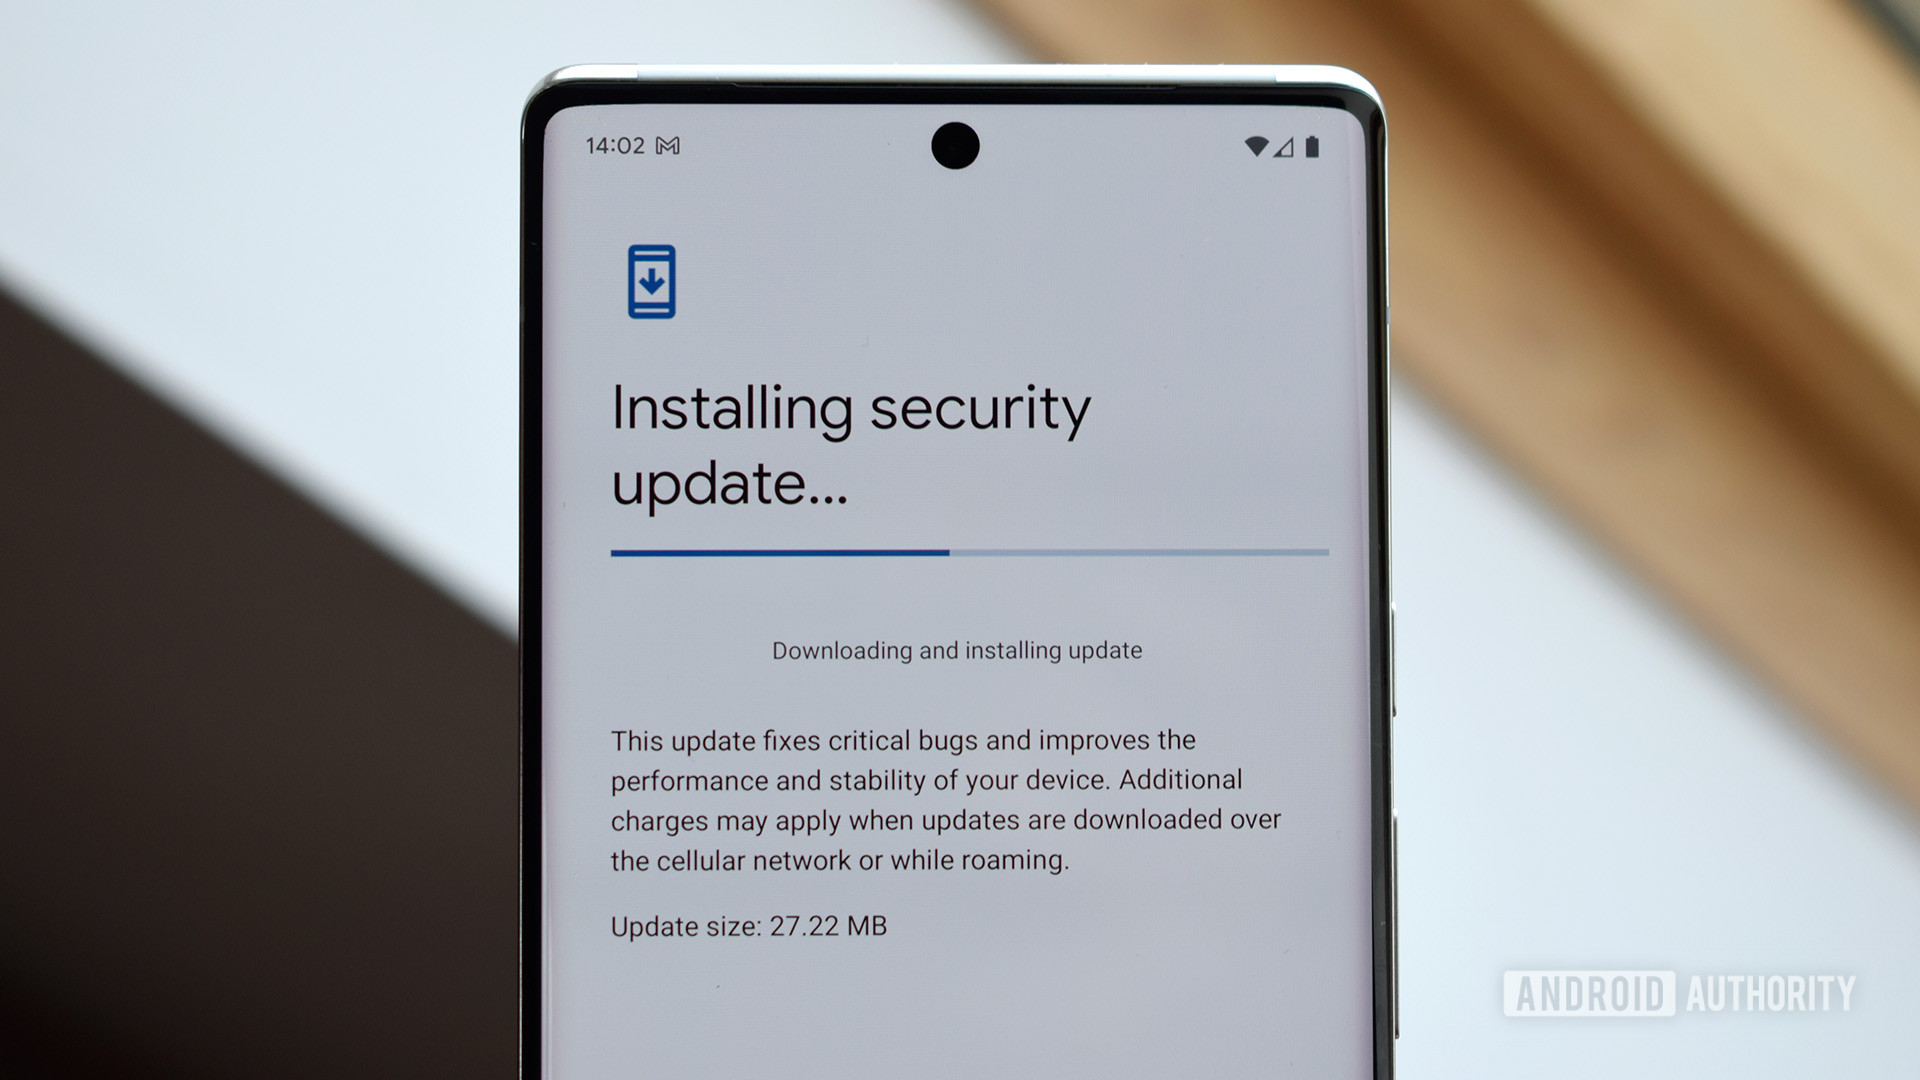 Android Security Update